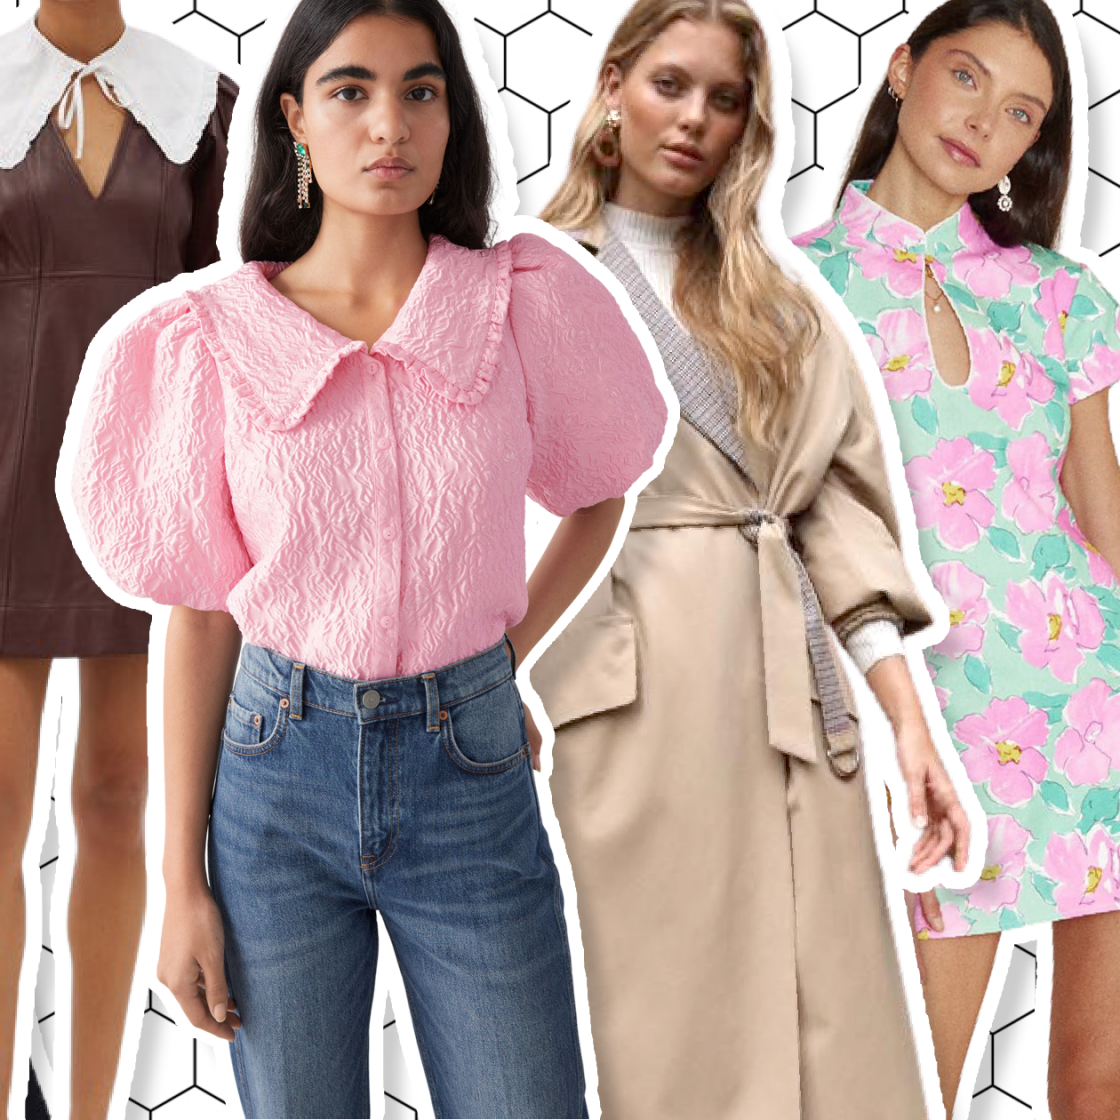 Spring 2021 Fashion Trends: Sweatshirts, Knits, Day Dresses, and More